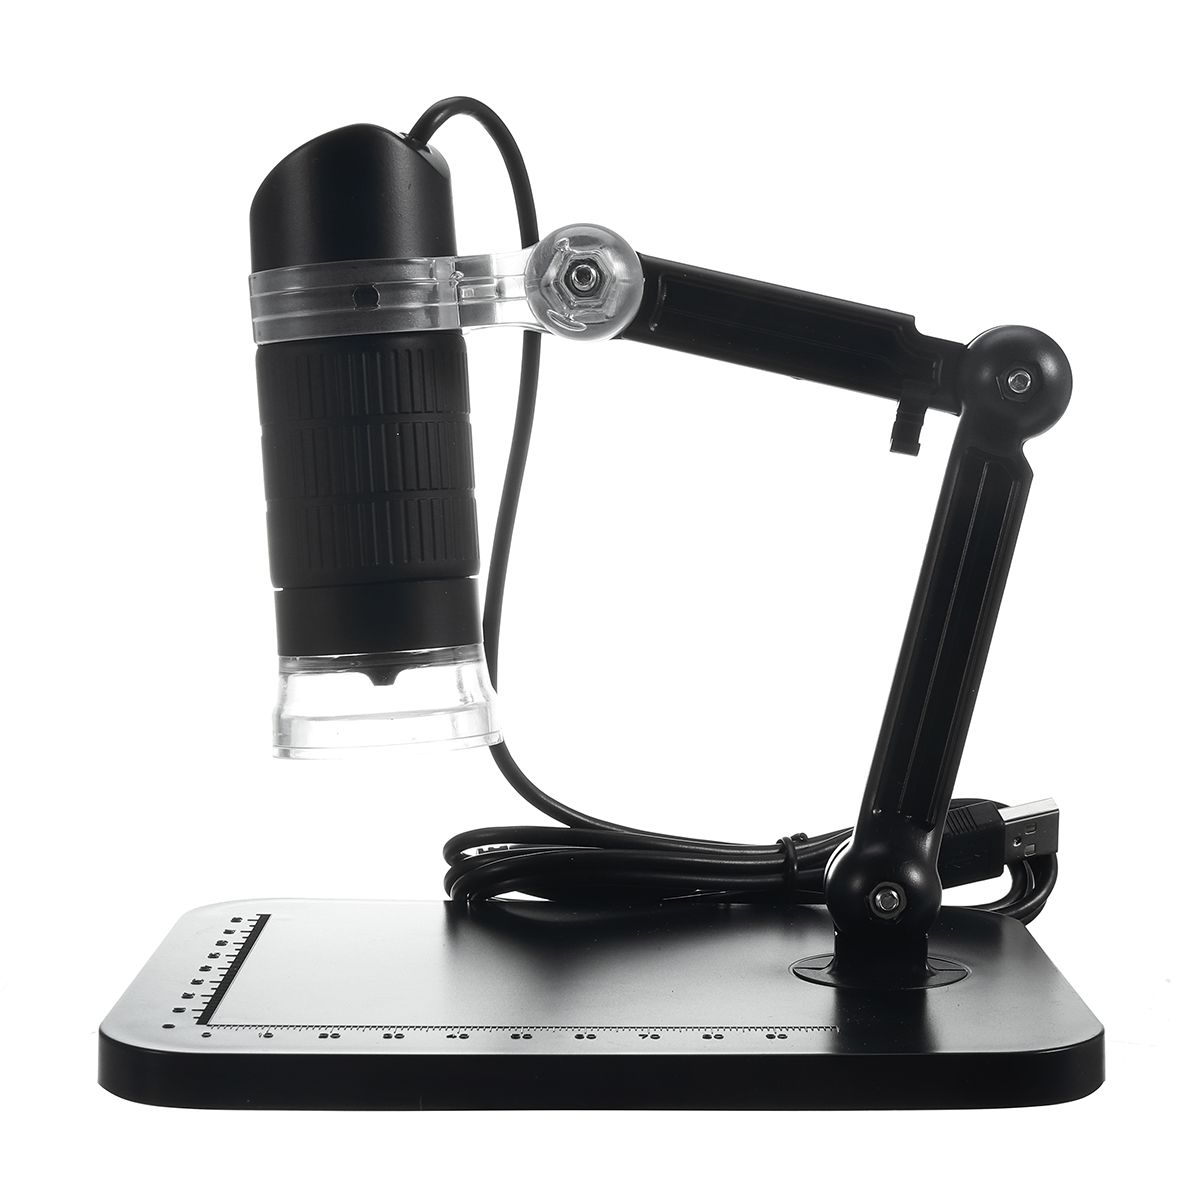 1000x-Magnifier-8-LED-USB-Digital-Microscope-Zoom-Camera-with-Lift-1644750